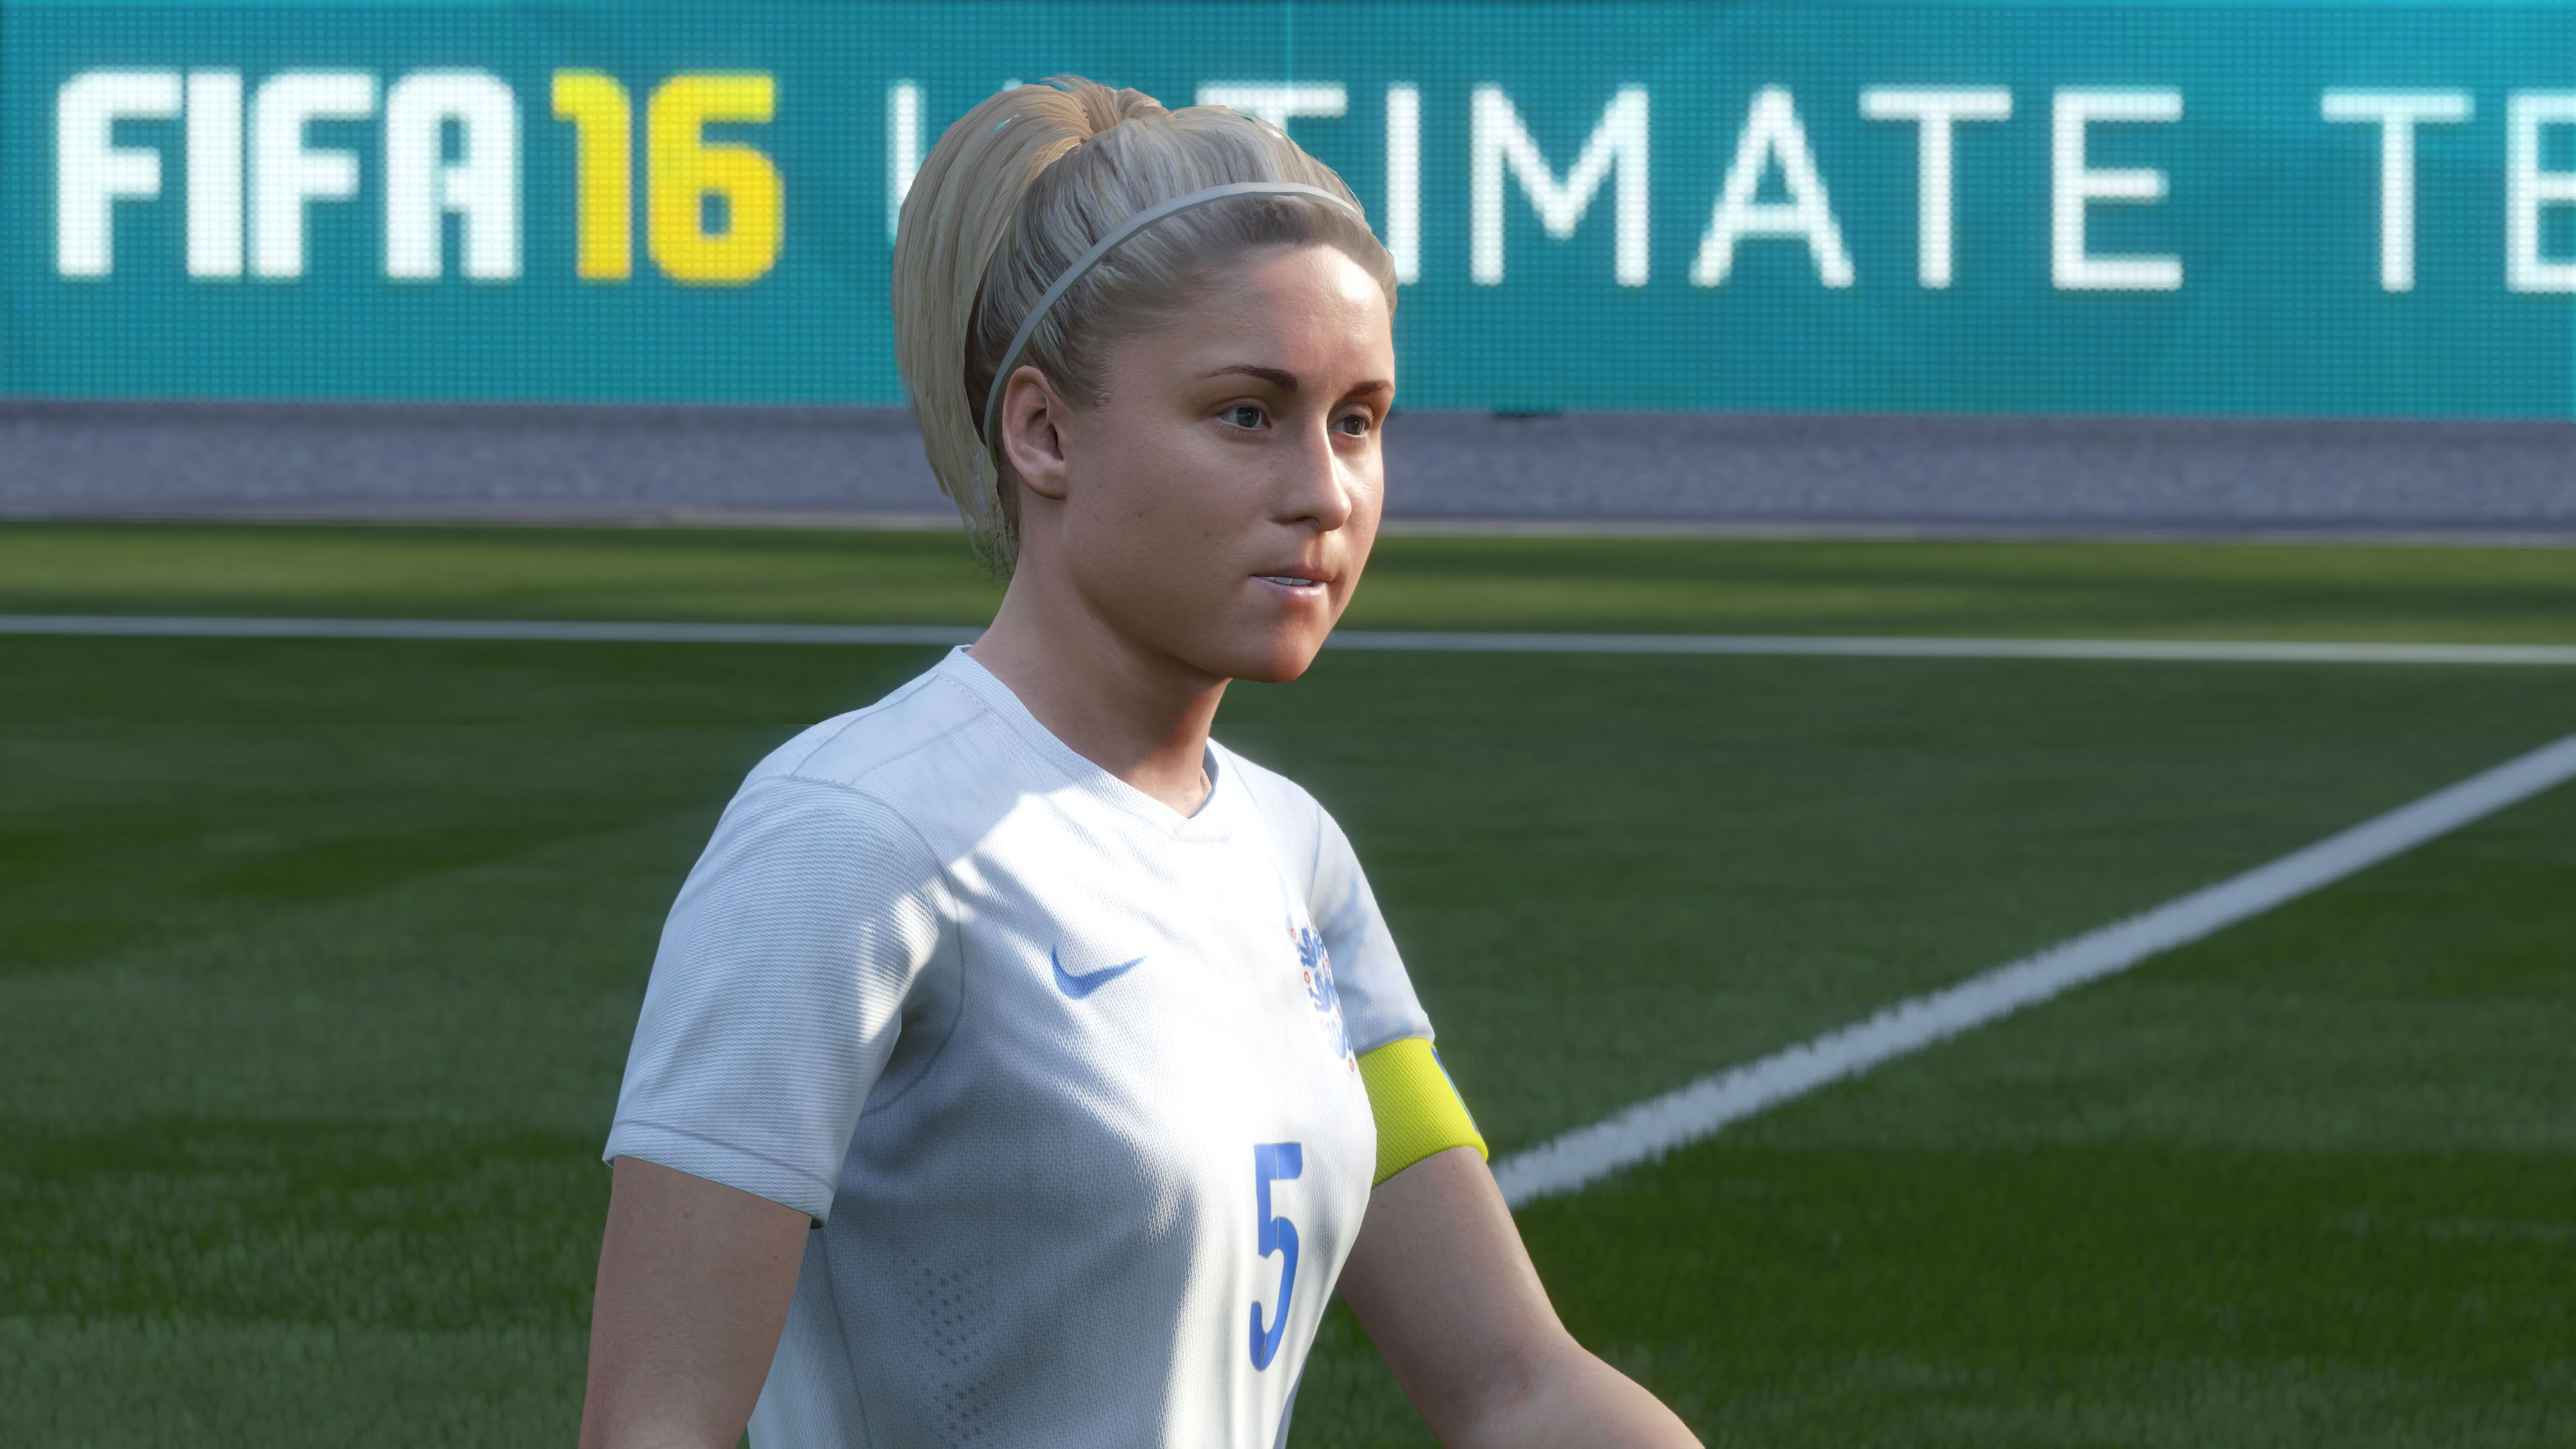 fifa 16 introduces women s football for the very first time image 7